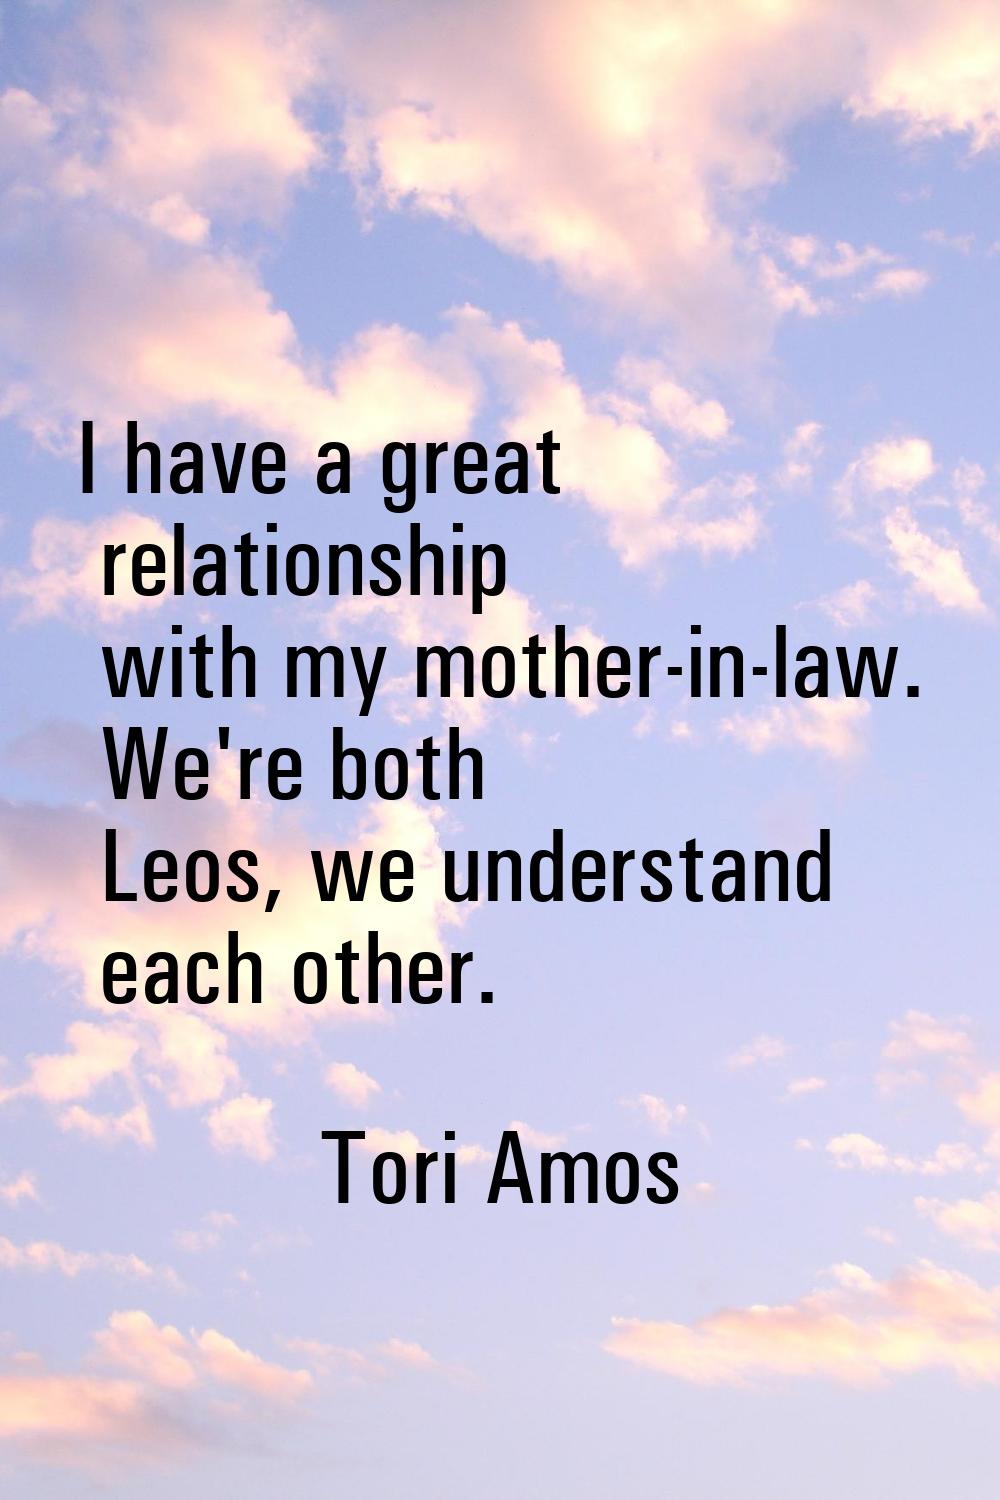 I have a great relationship with my mother-in-law. We're both Leos, we understand each other.